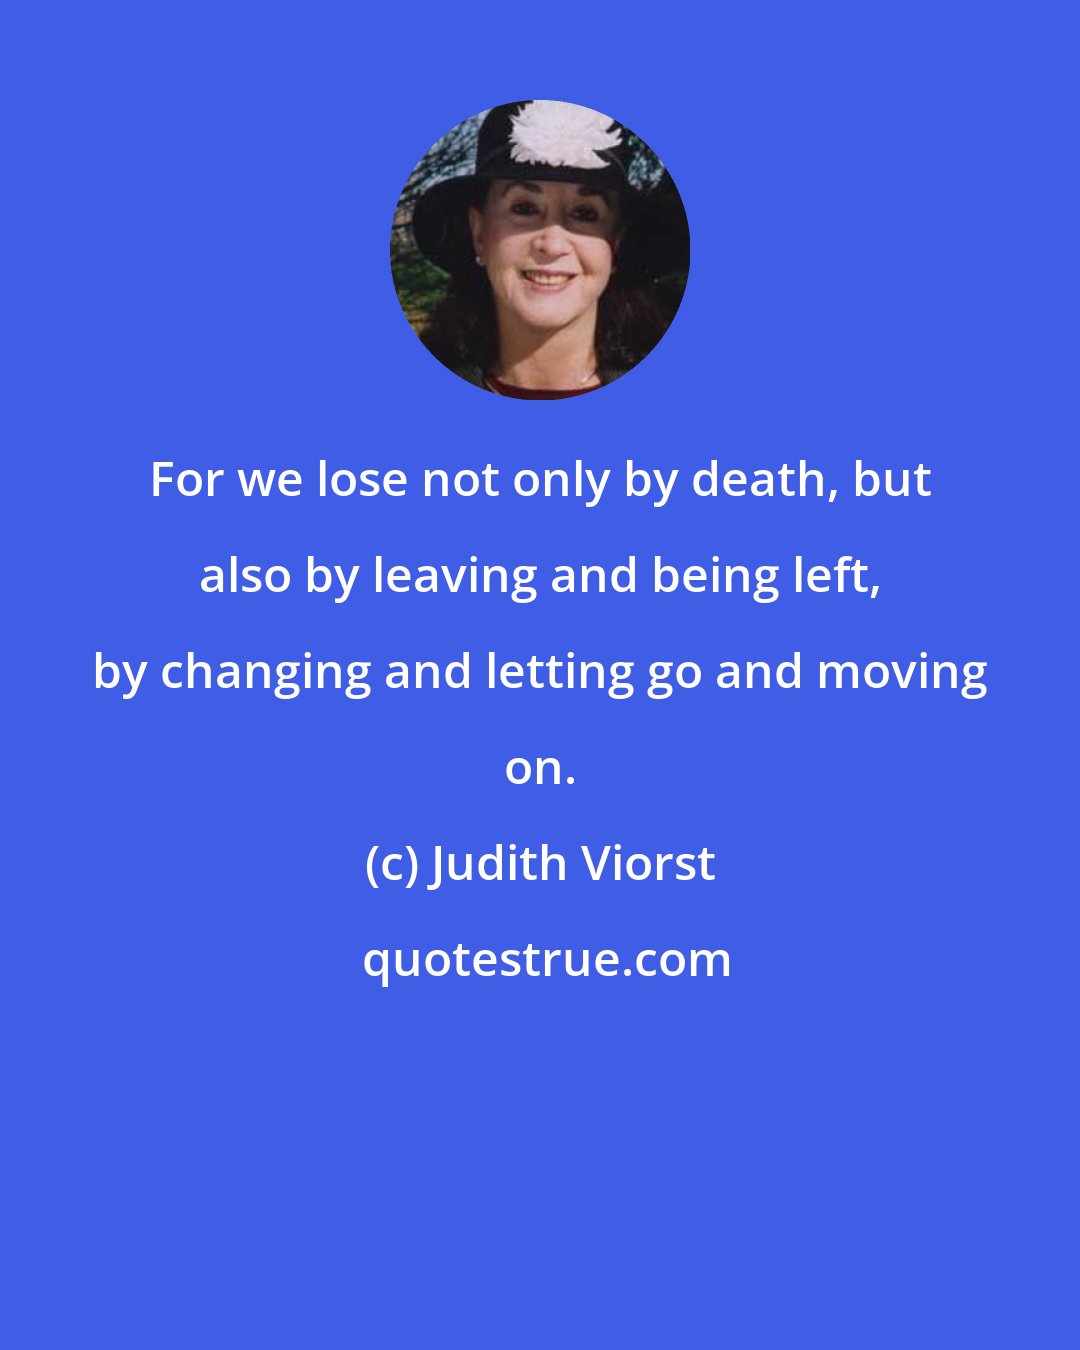 Judith Viorst: For we lose not only by death, but also by leaving and being left, by changing and letting go and moving on.